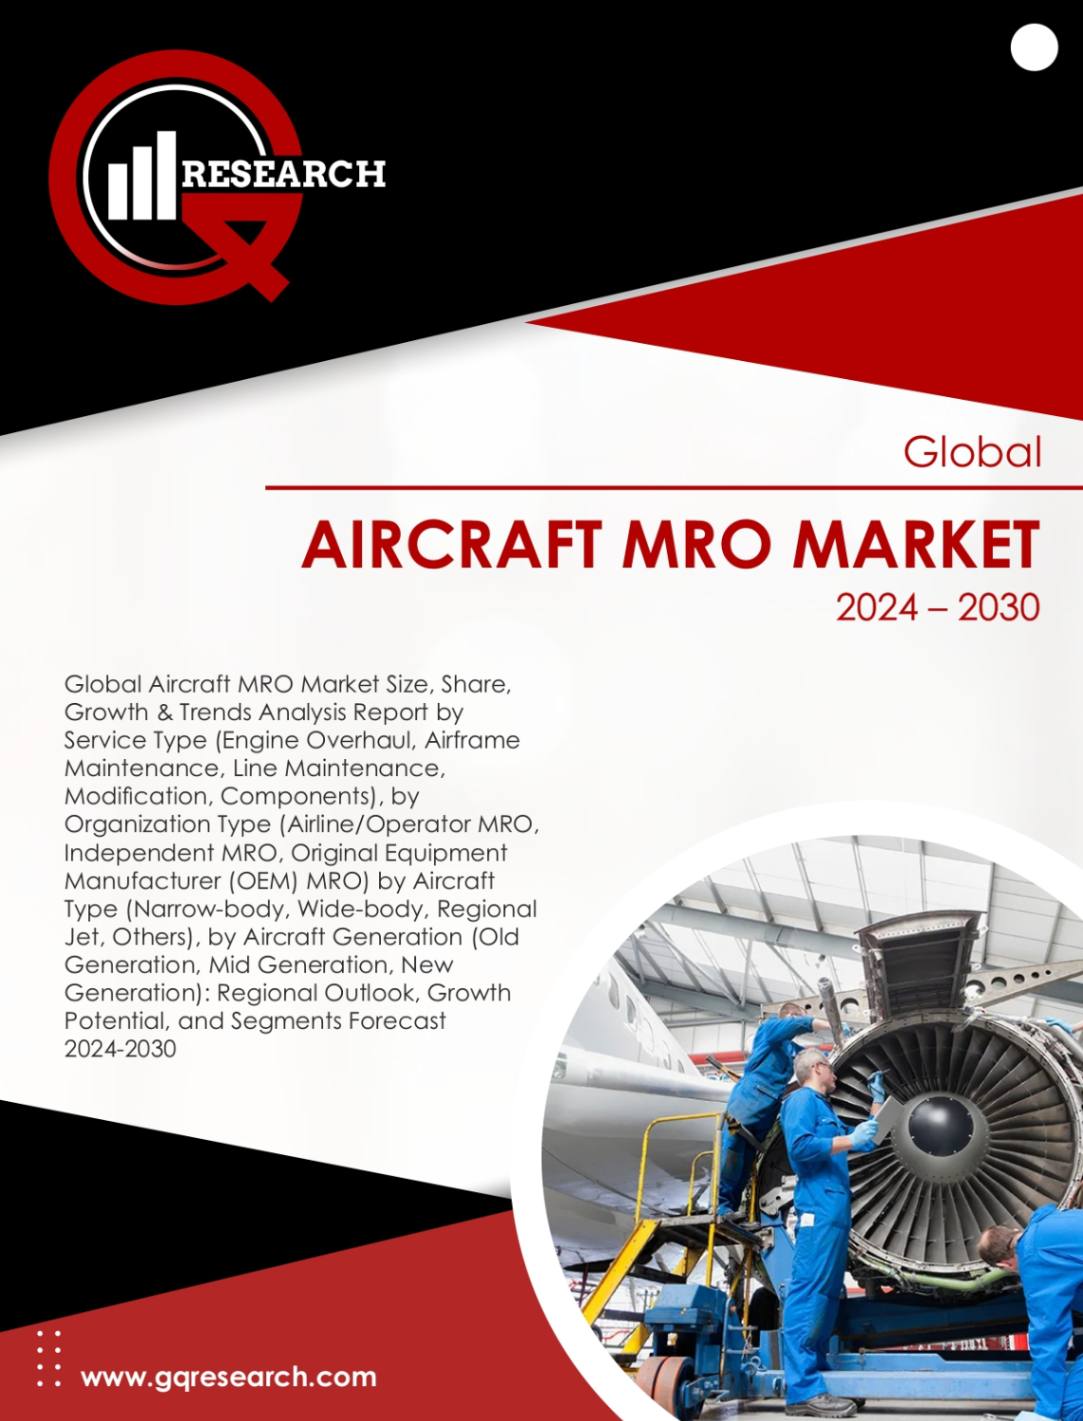 Aircraft MRO Market Growth Analysis by Size, Share & Forecast to 2030 | GQ Research